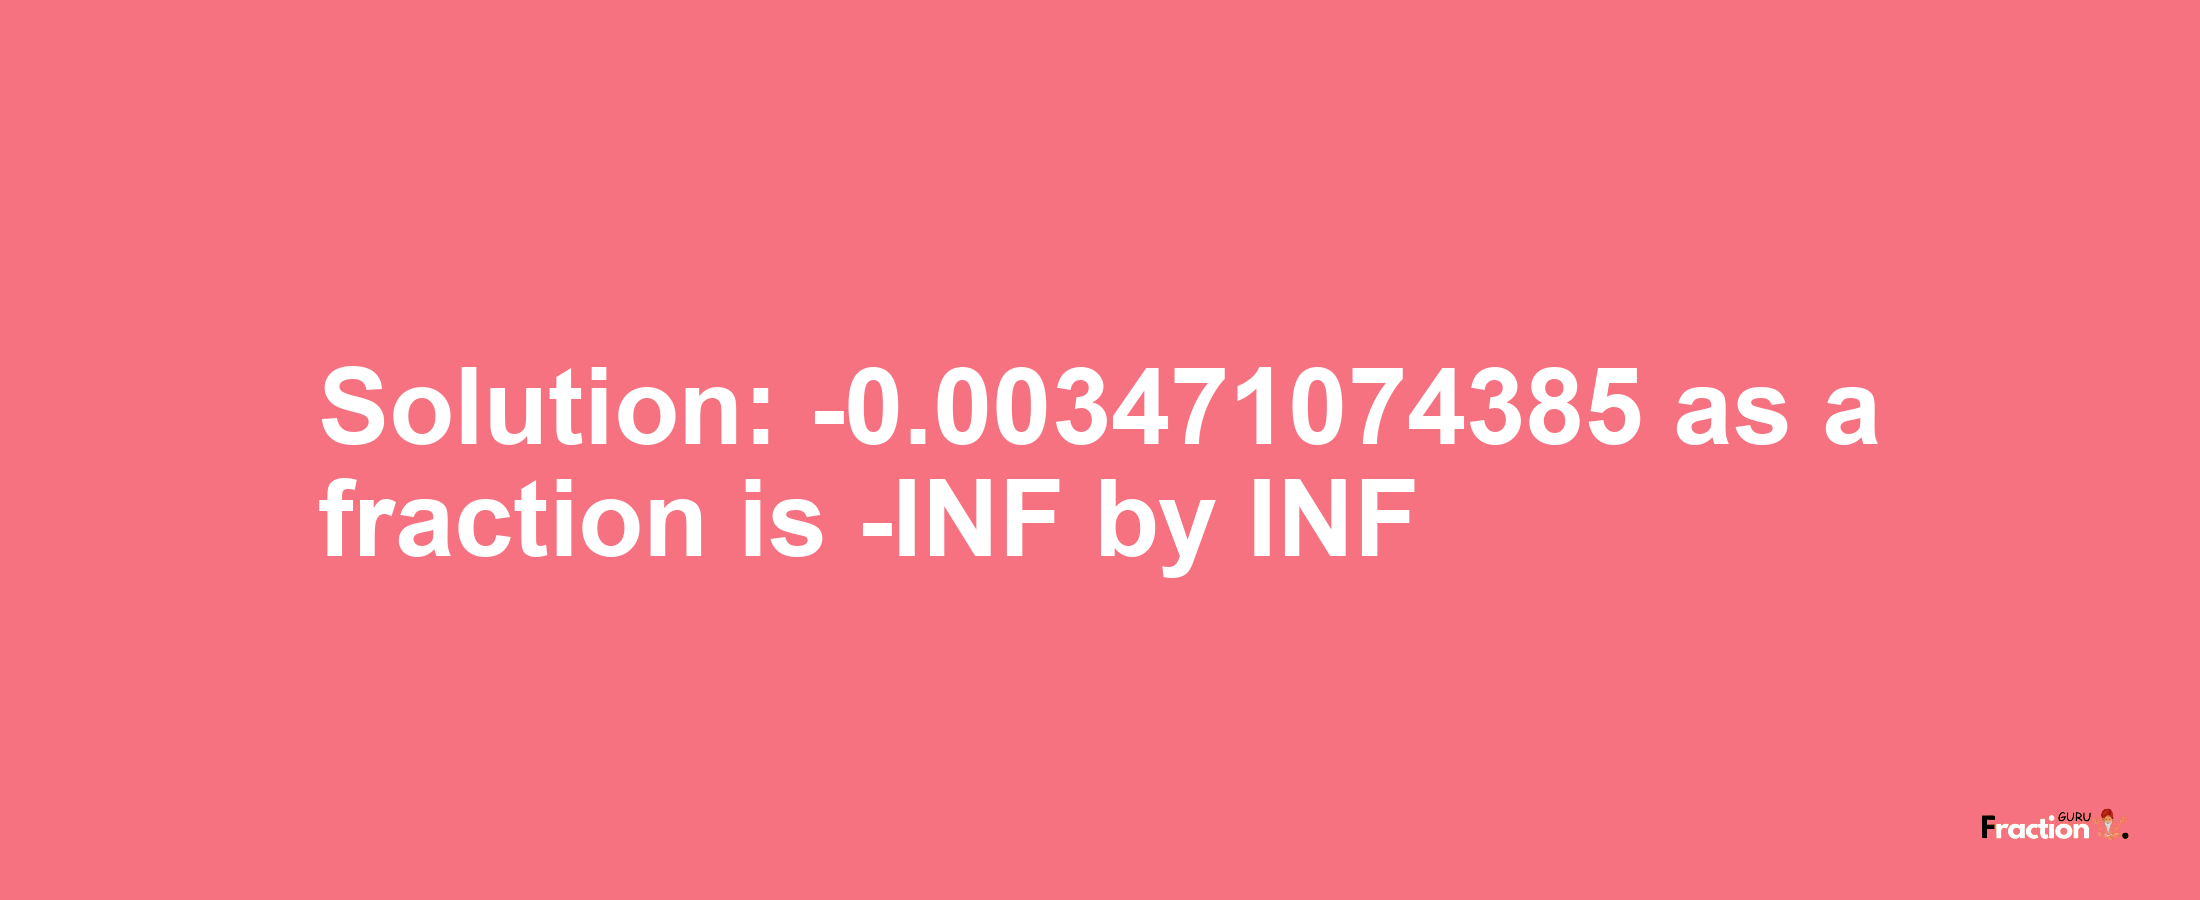 Solution:-0.003471074385 as a fraction is -INF/INF